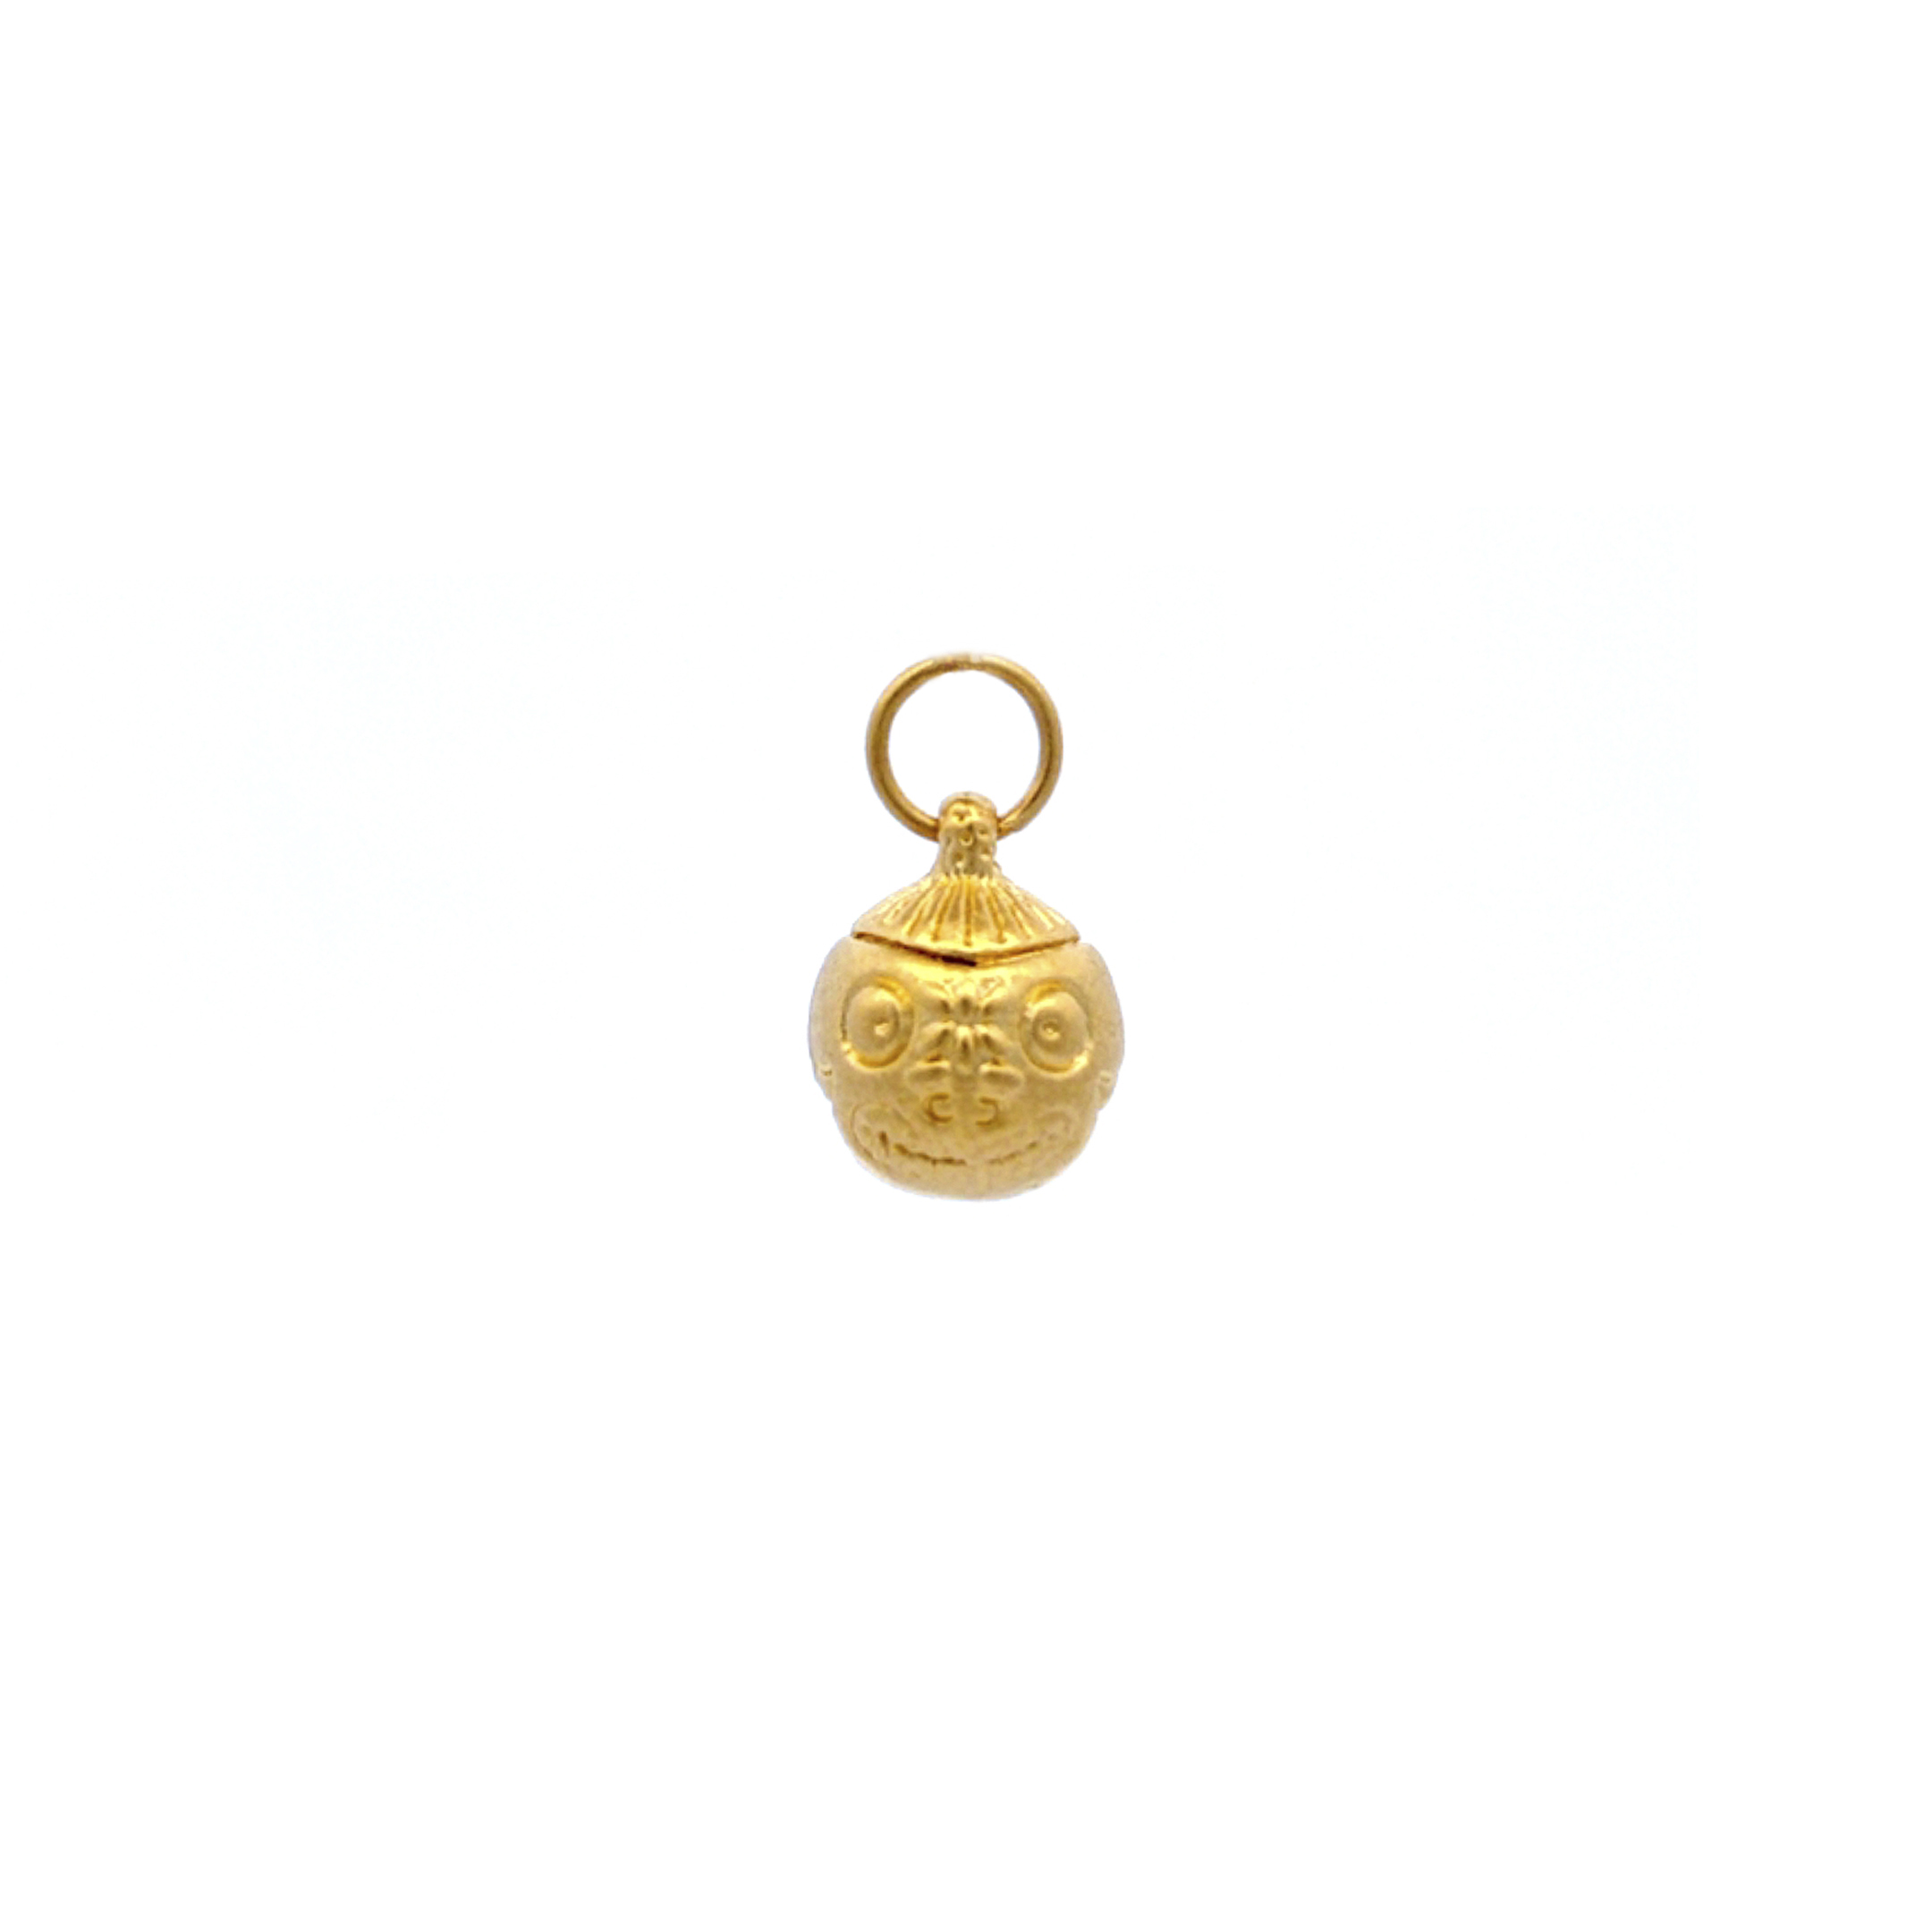 TIANSI 999 (24K) Gold Bell Swallow Gold Mythical Beast Pendant